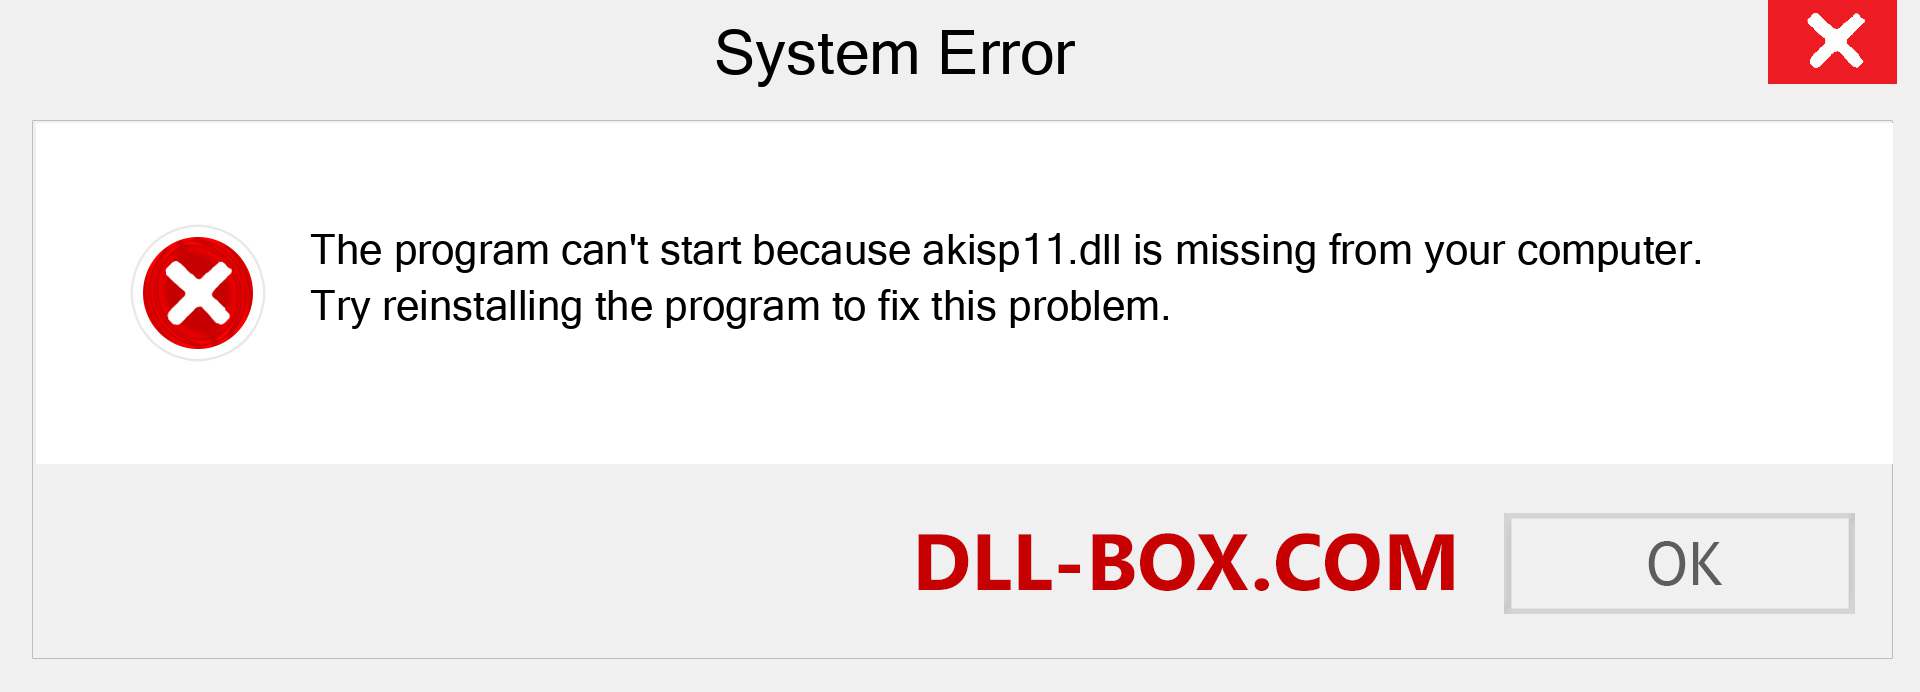  akisp11.dll file is missing?. Download for Windows 7, 8, 10 - Fix  akisp11 dll Missing Error on Windows, photos, images